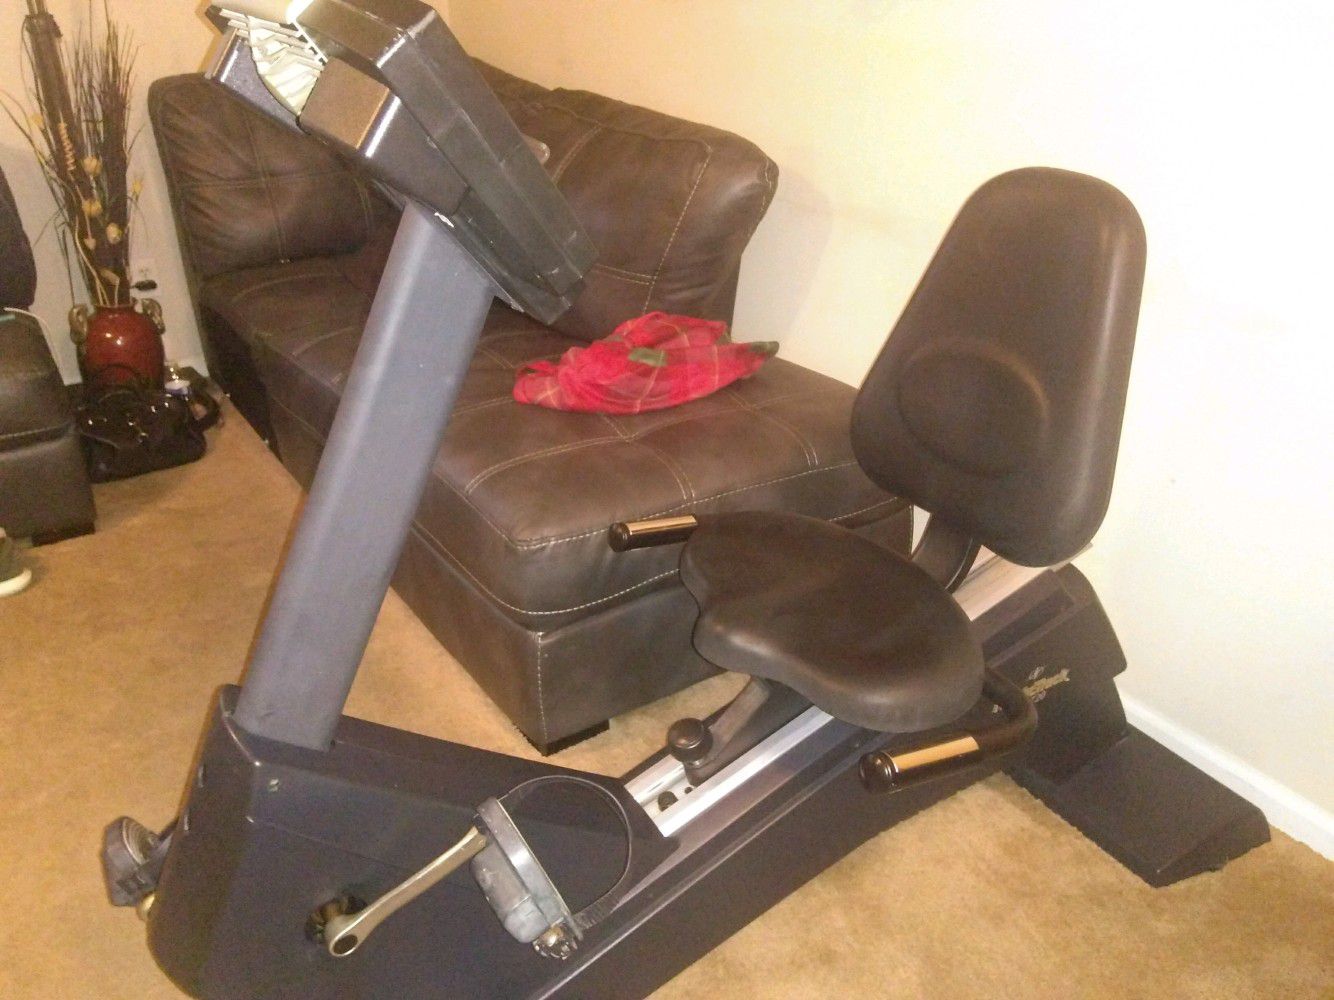 Nordictrack sl 720 Recumbent bike for sale or trade for treadmill if interested I have someone to help load it on your truck